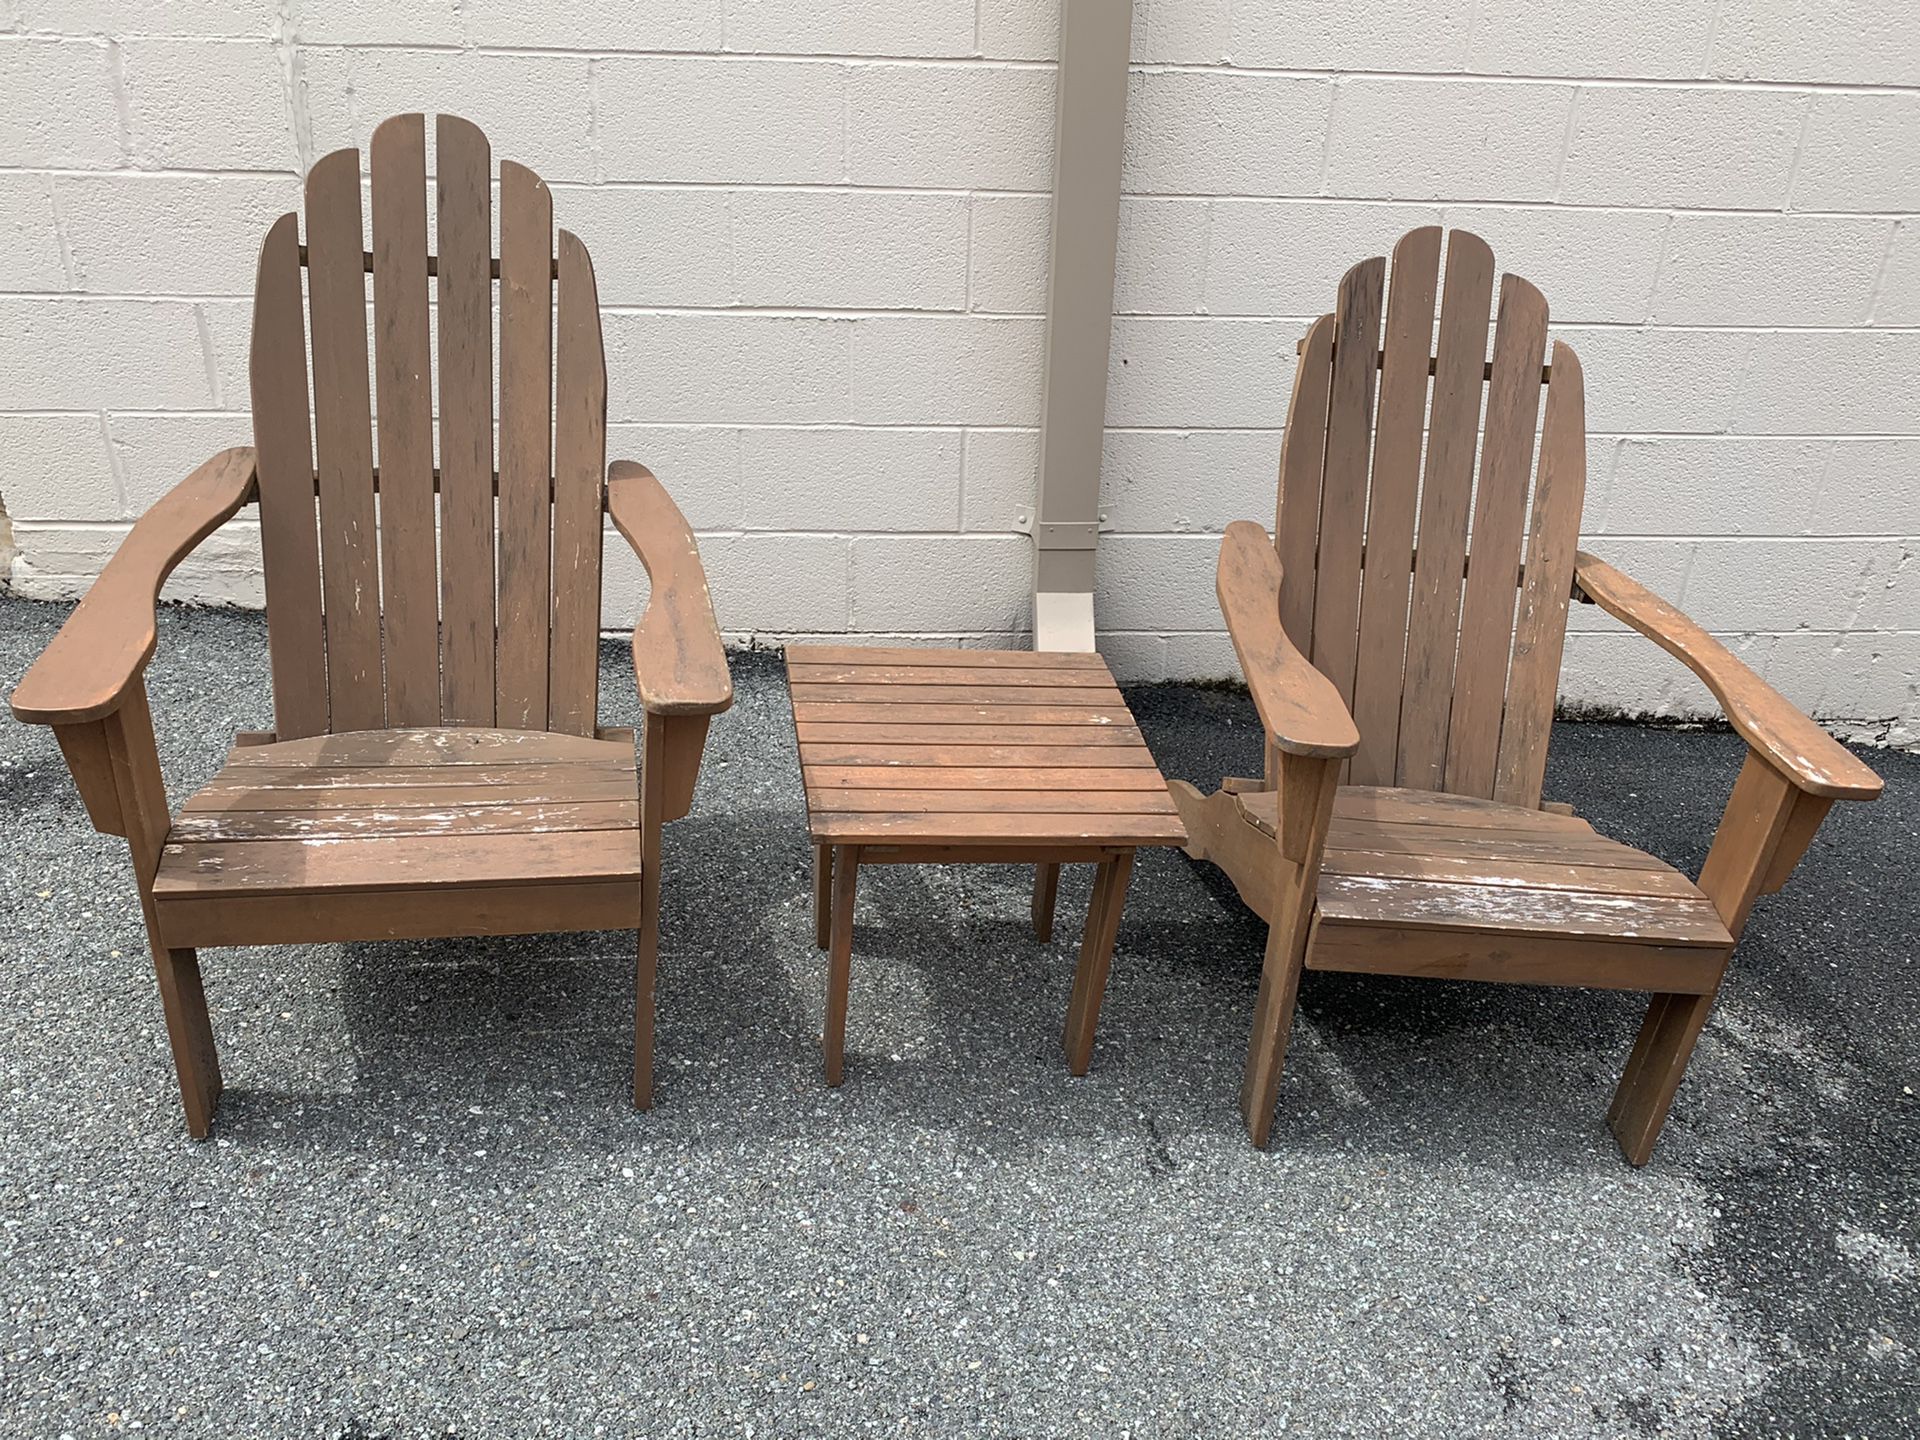 Sturdy wooden Adirondack chairs and table